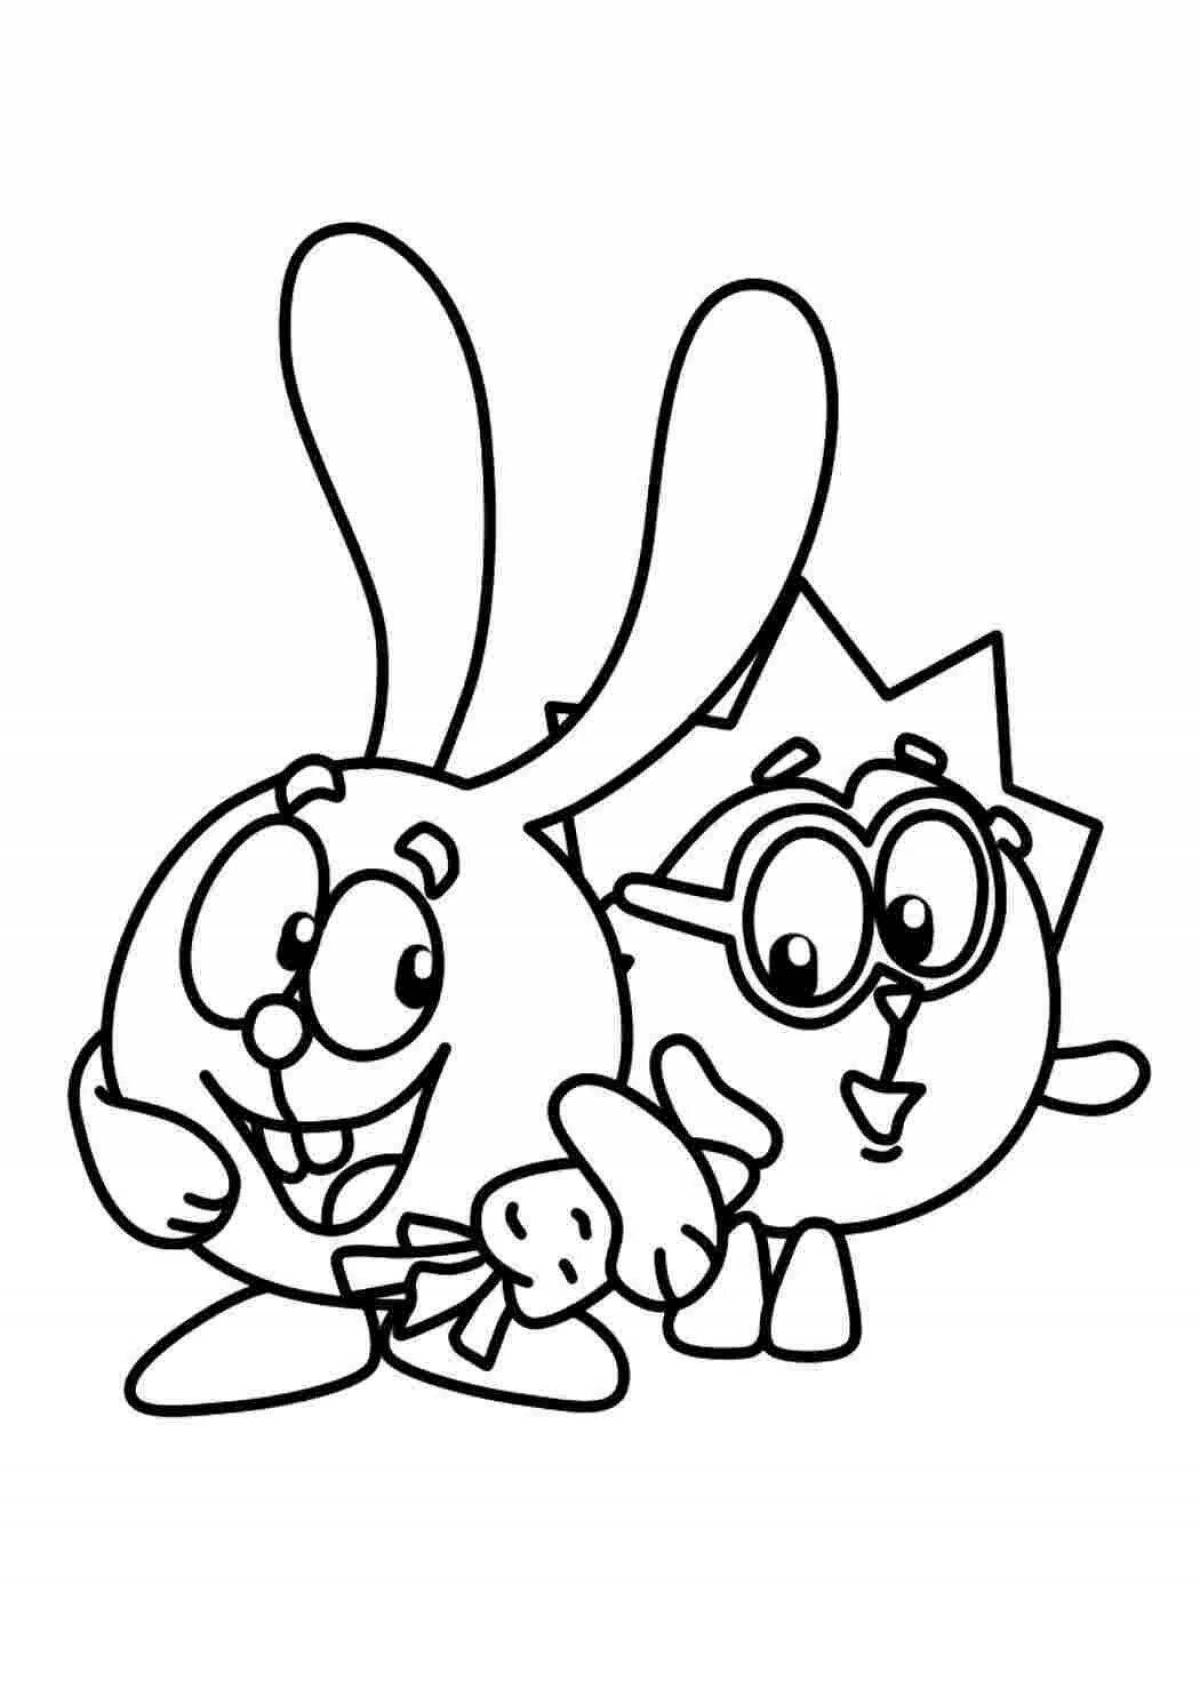 Color-explosion coloring page bw for kids